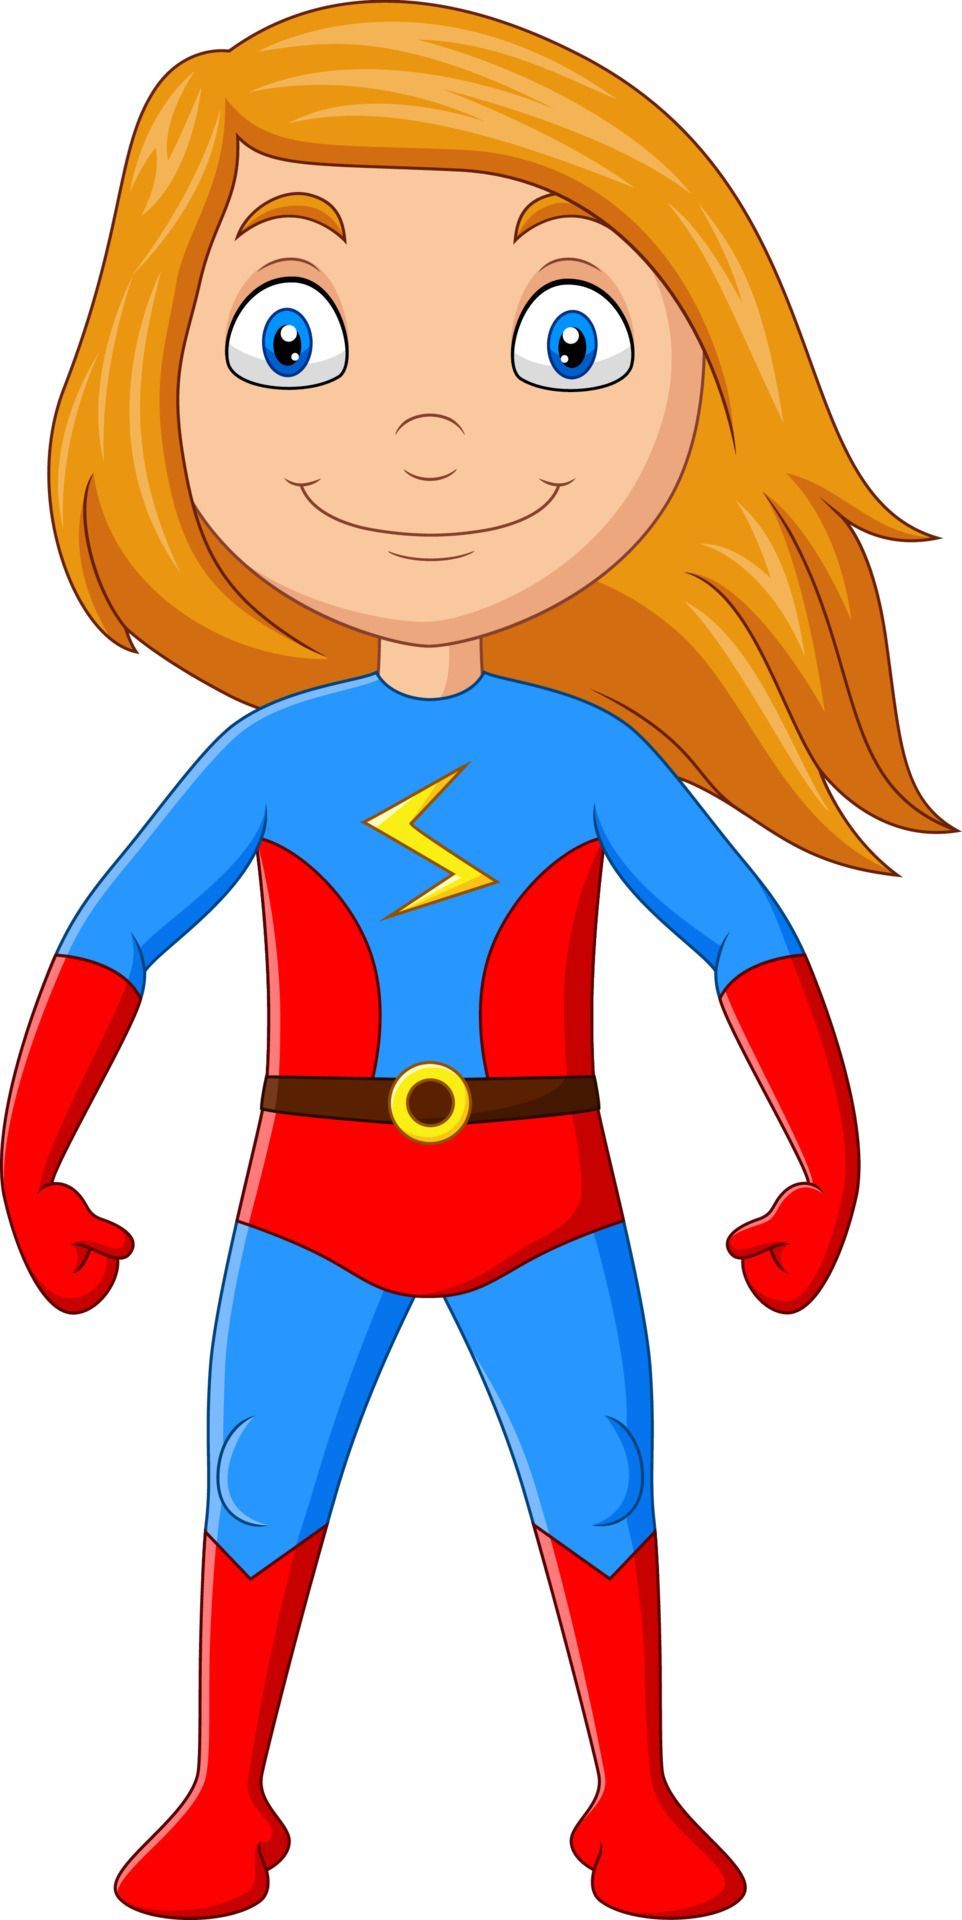 A cartoon girl in a superhero costume is standing with her hands on her hips.